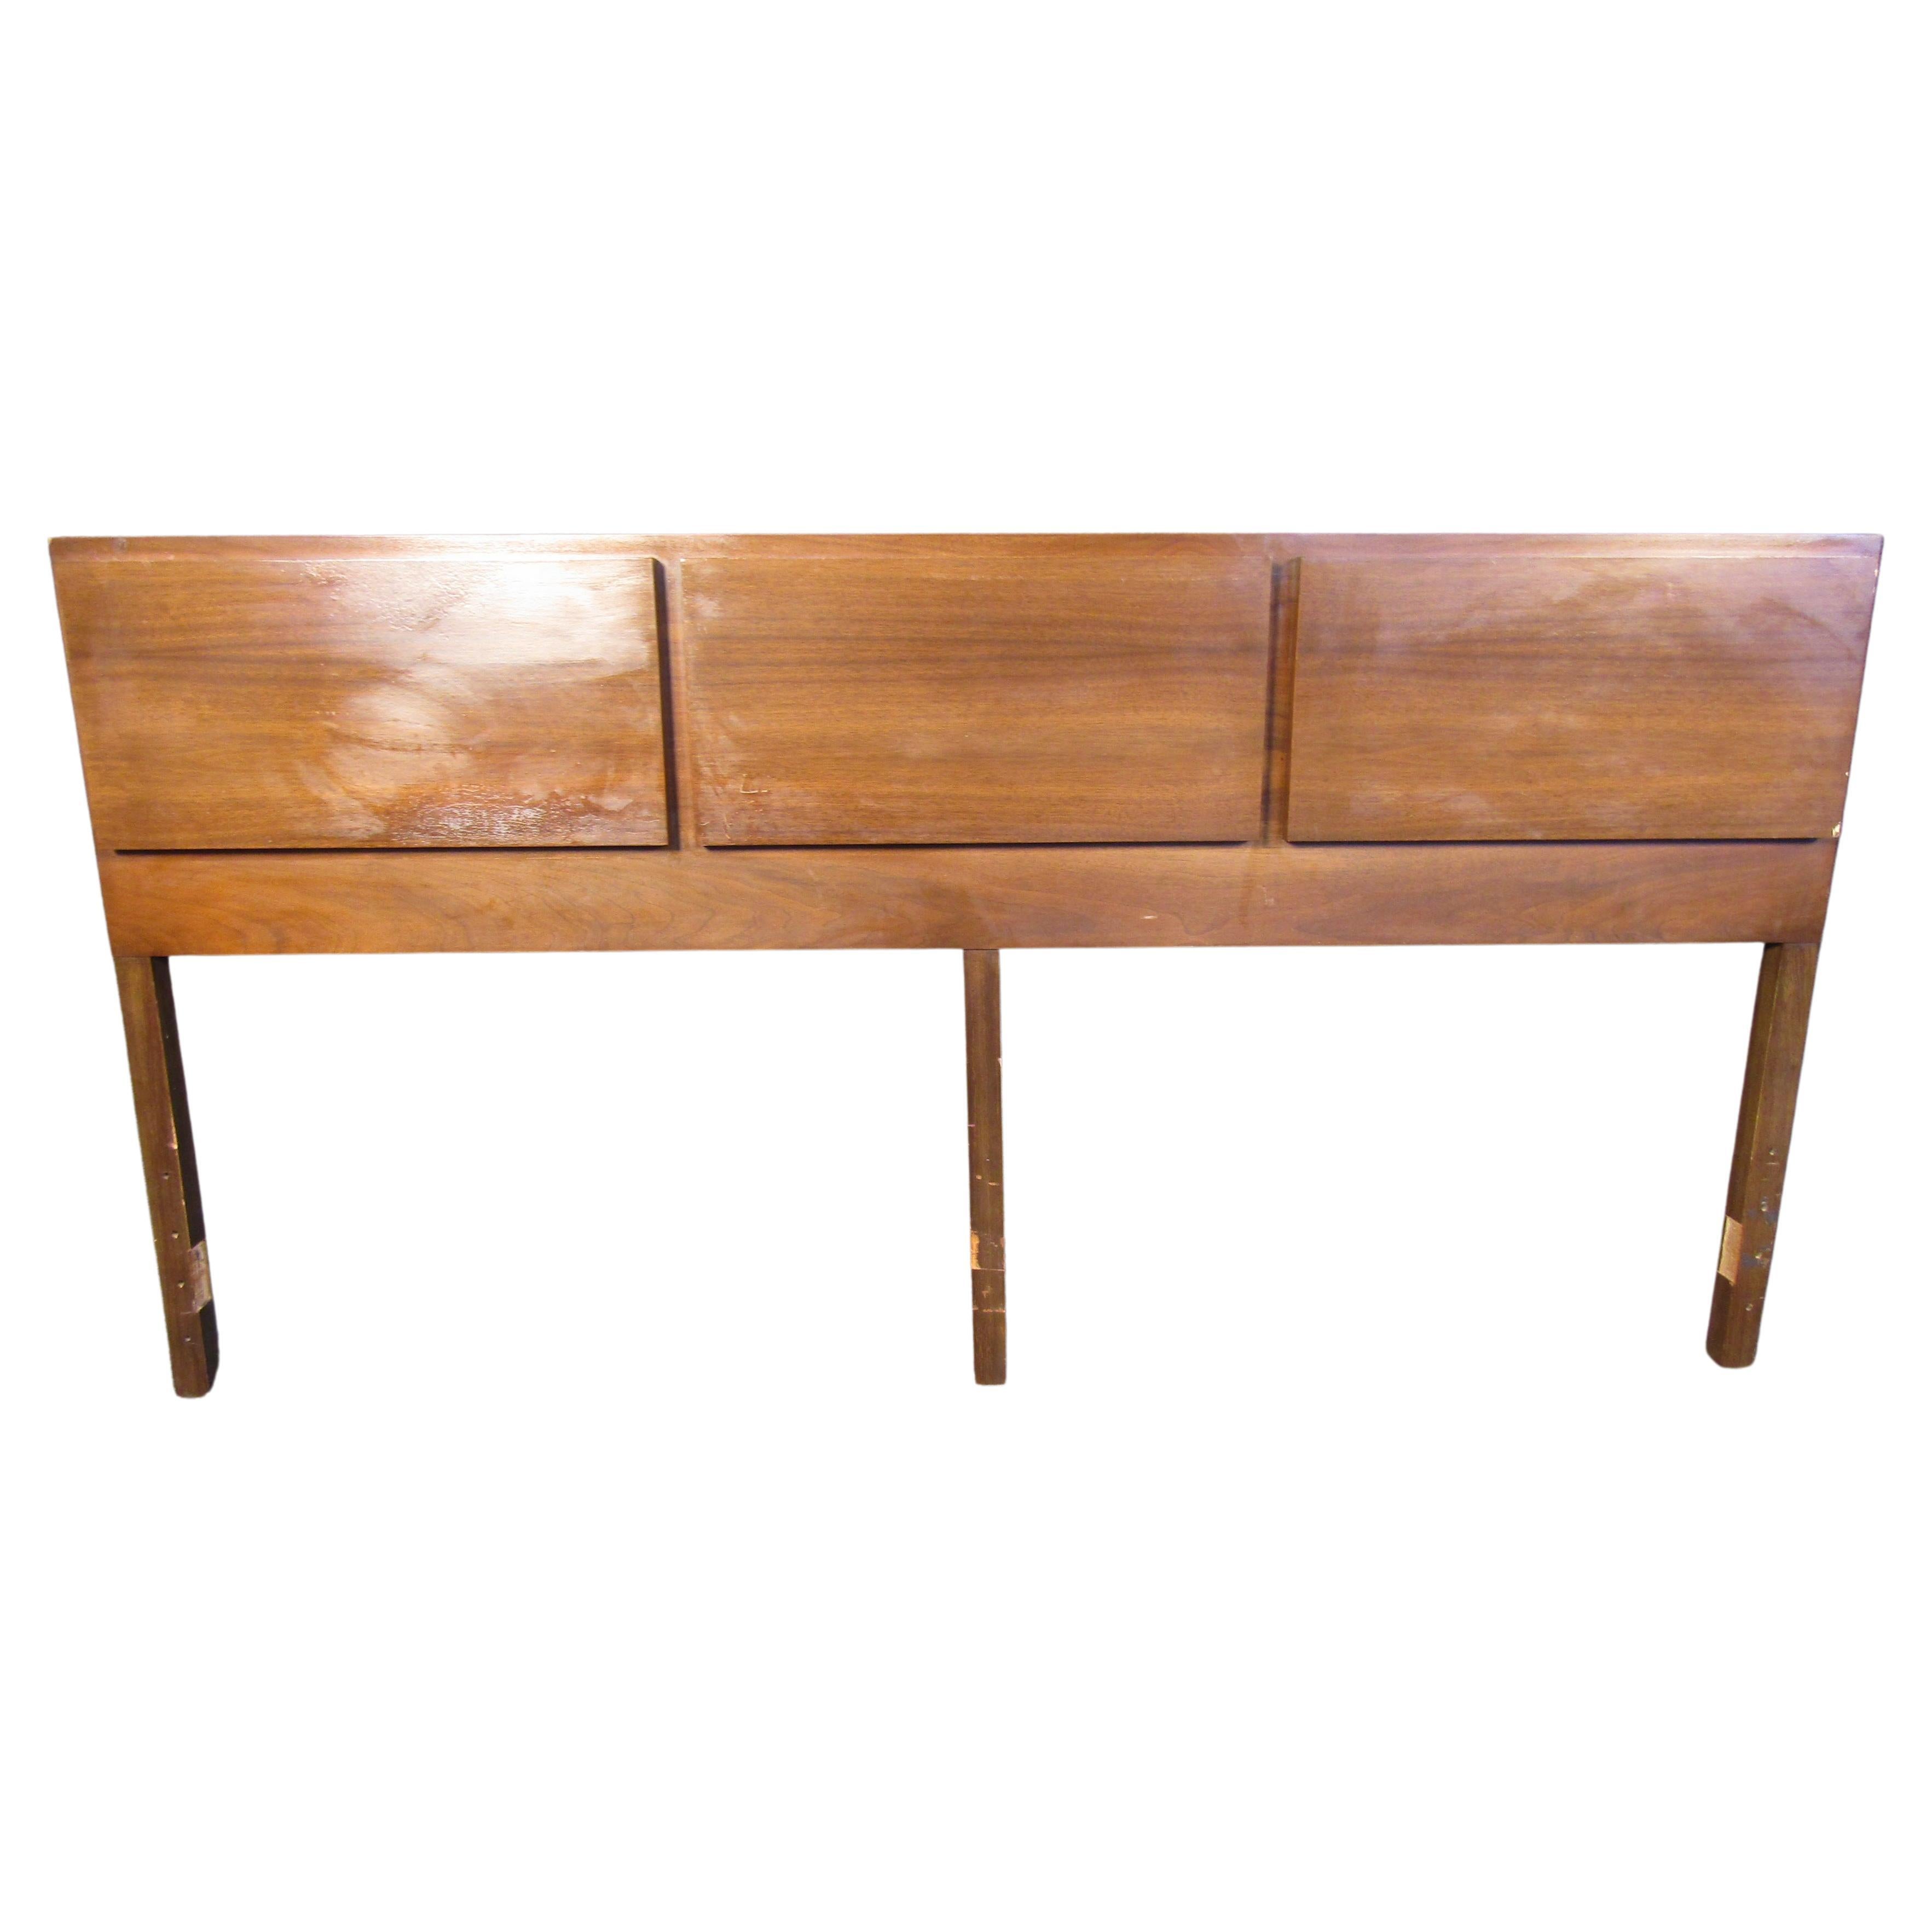 This large walnut headboard is perfect for adding Mid-Century Modern style to a bedroom. Please confirm item location with seller (NY/NJ).